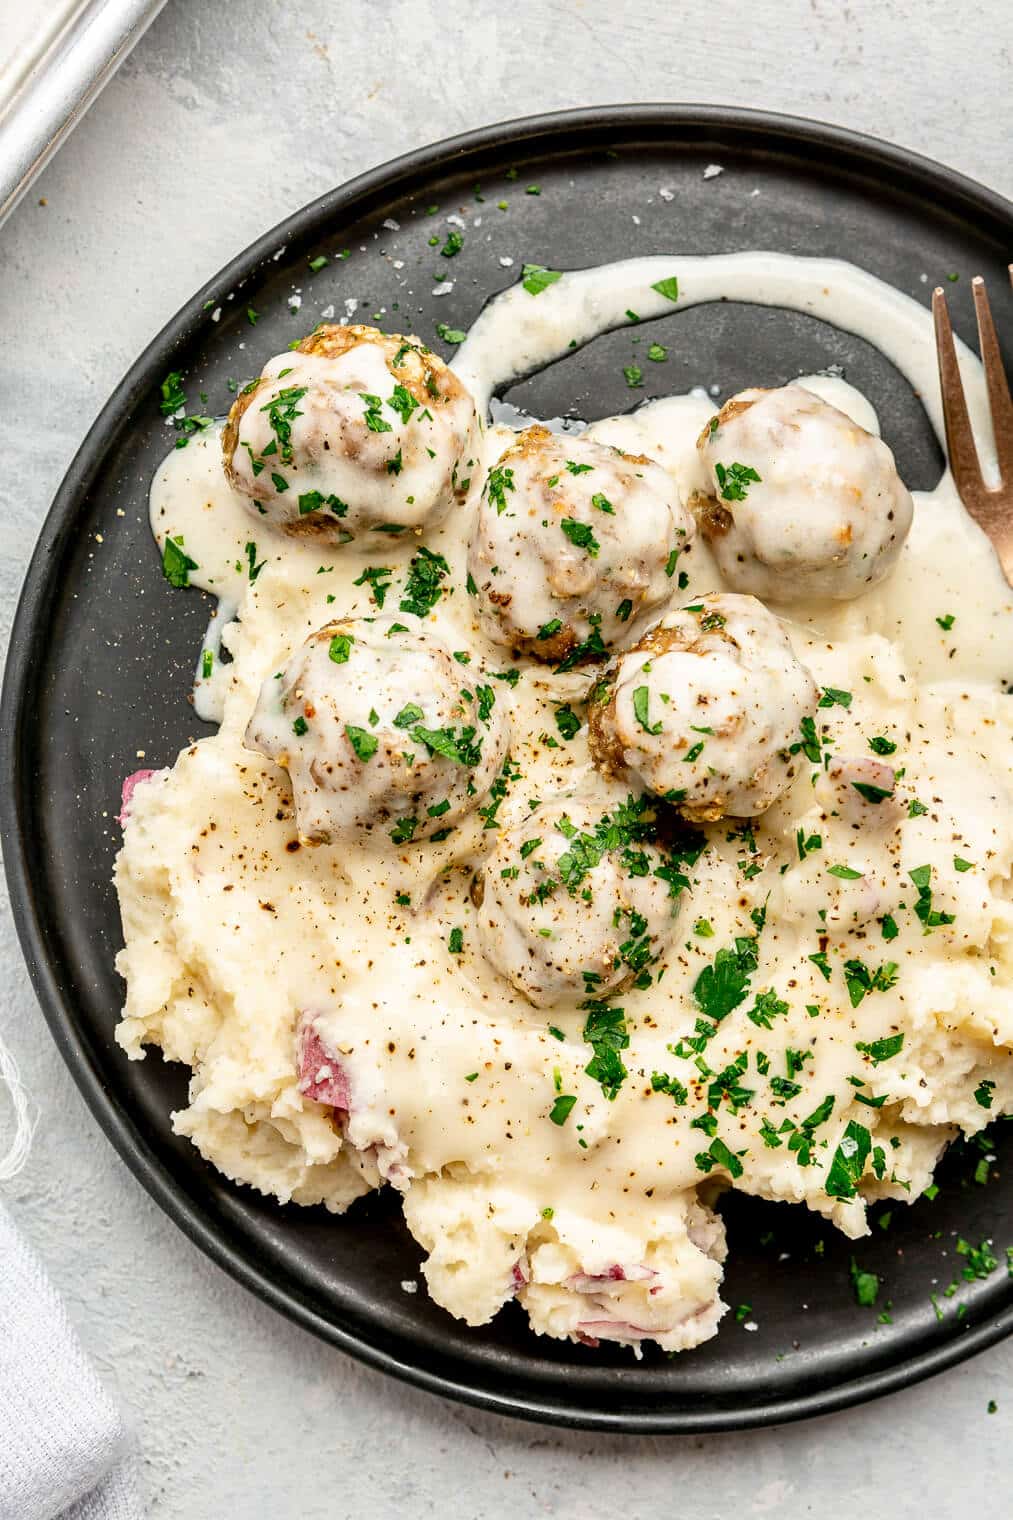 A plate of mashed potatoes and Swedish meatballs with gravy.